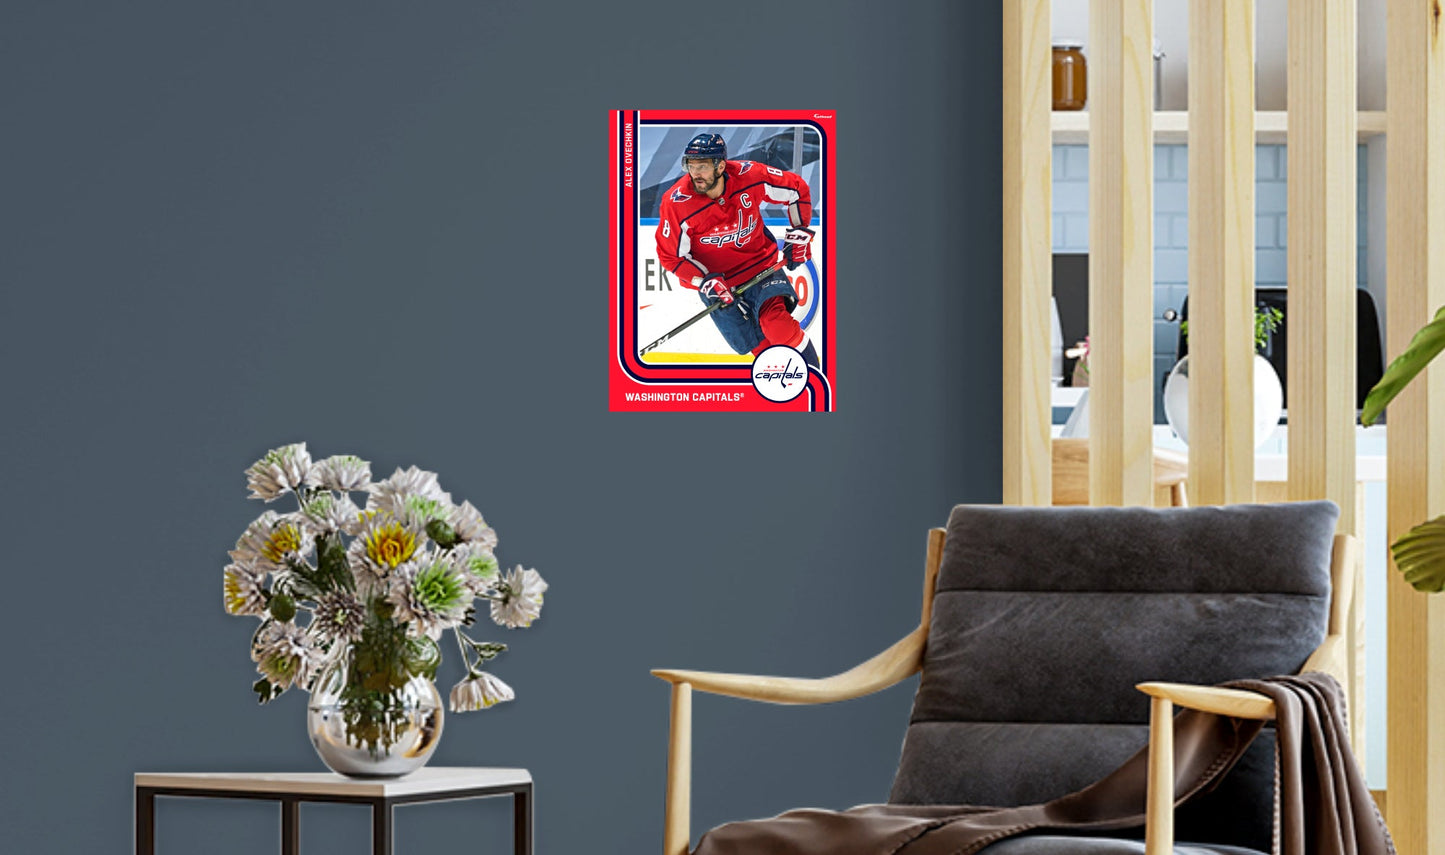 Washington Capitals: Alex Ovechkin Poster - Officially Licensed NHL Removable Adhesive Decal